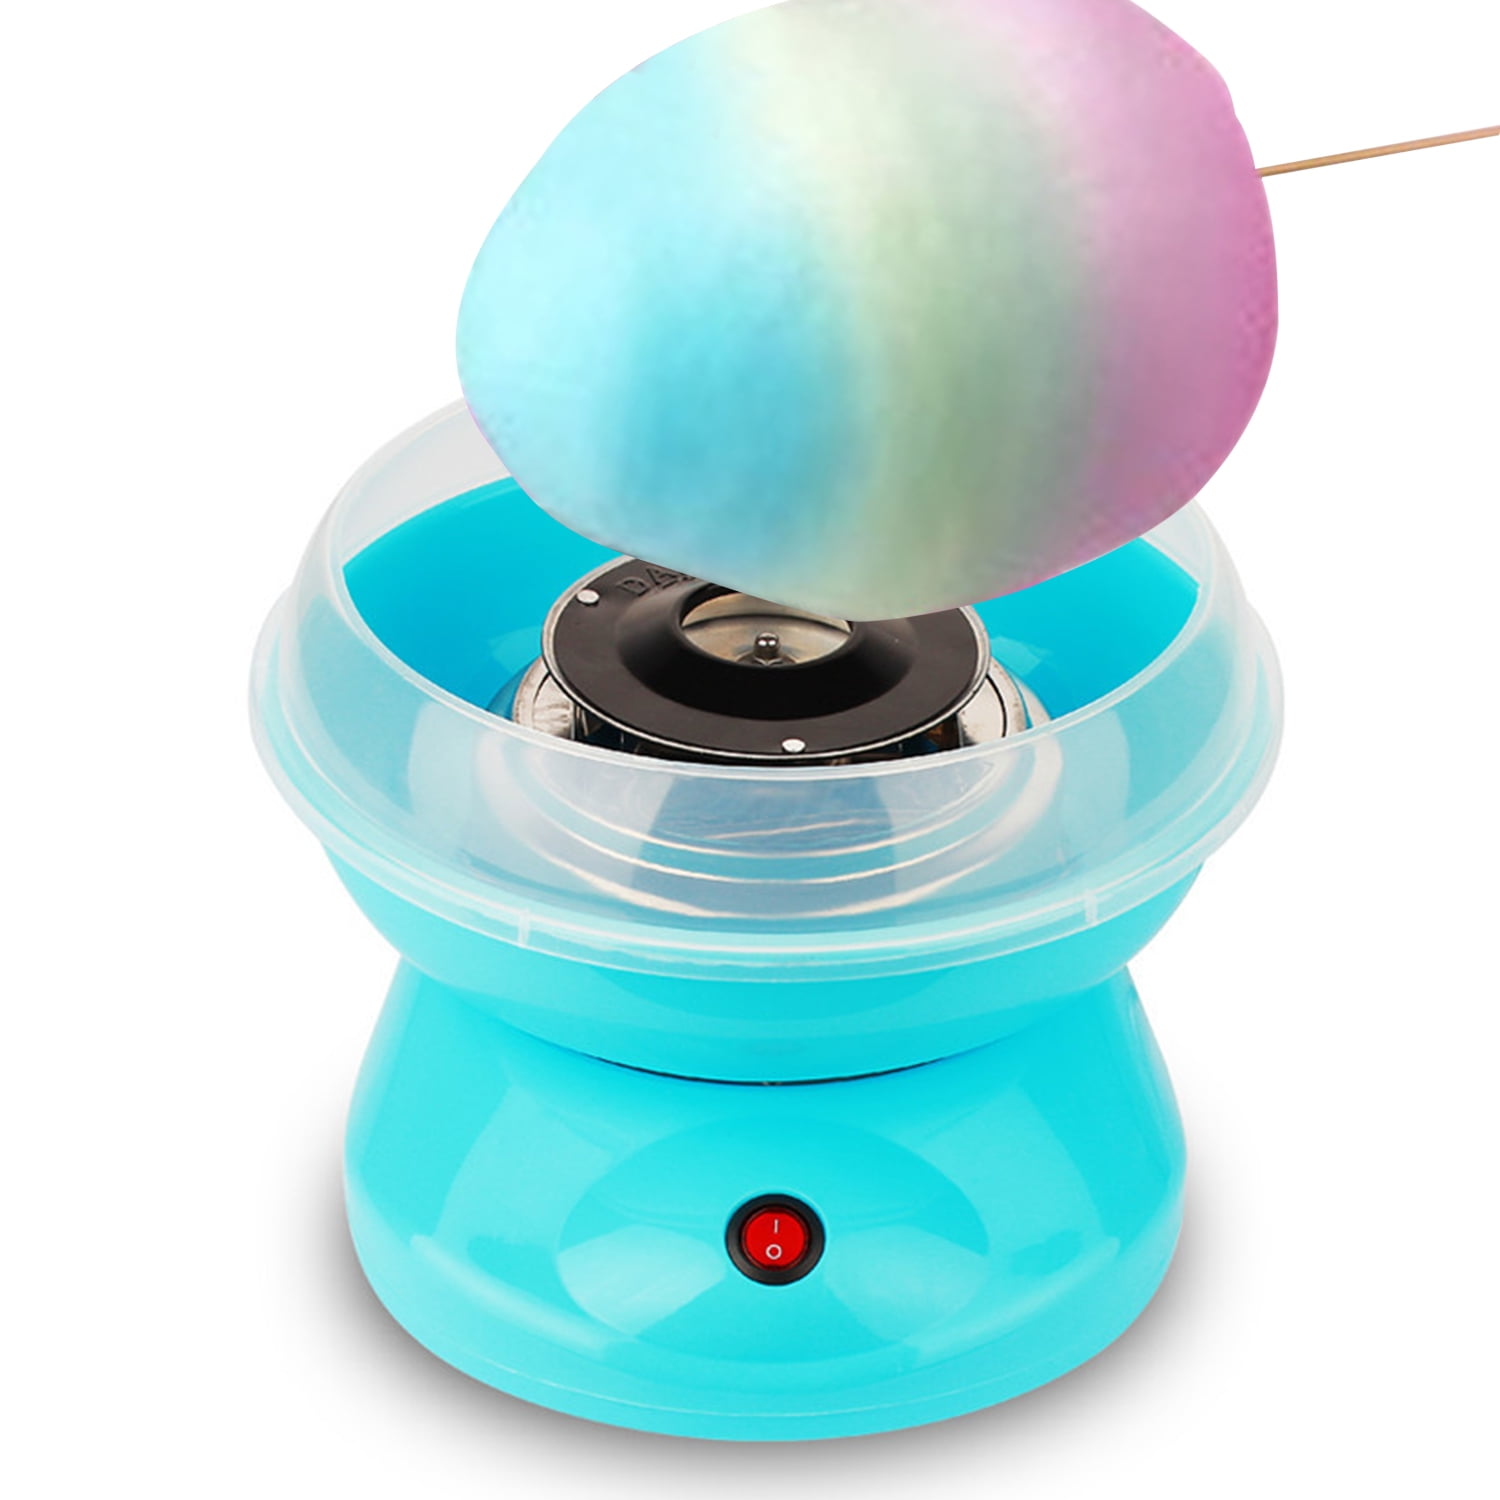 Cotton Candy Machines Floss Electric Carnival Desserts Sugar Makers For Children 